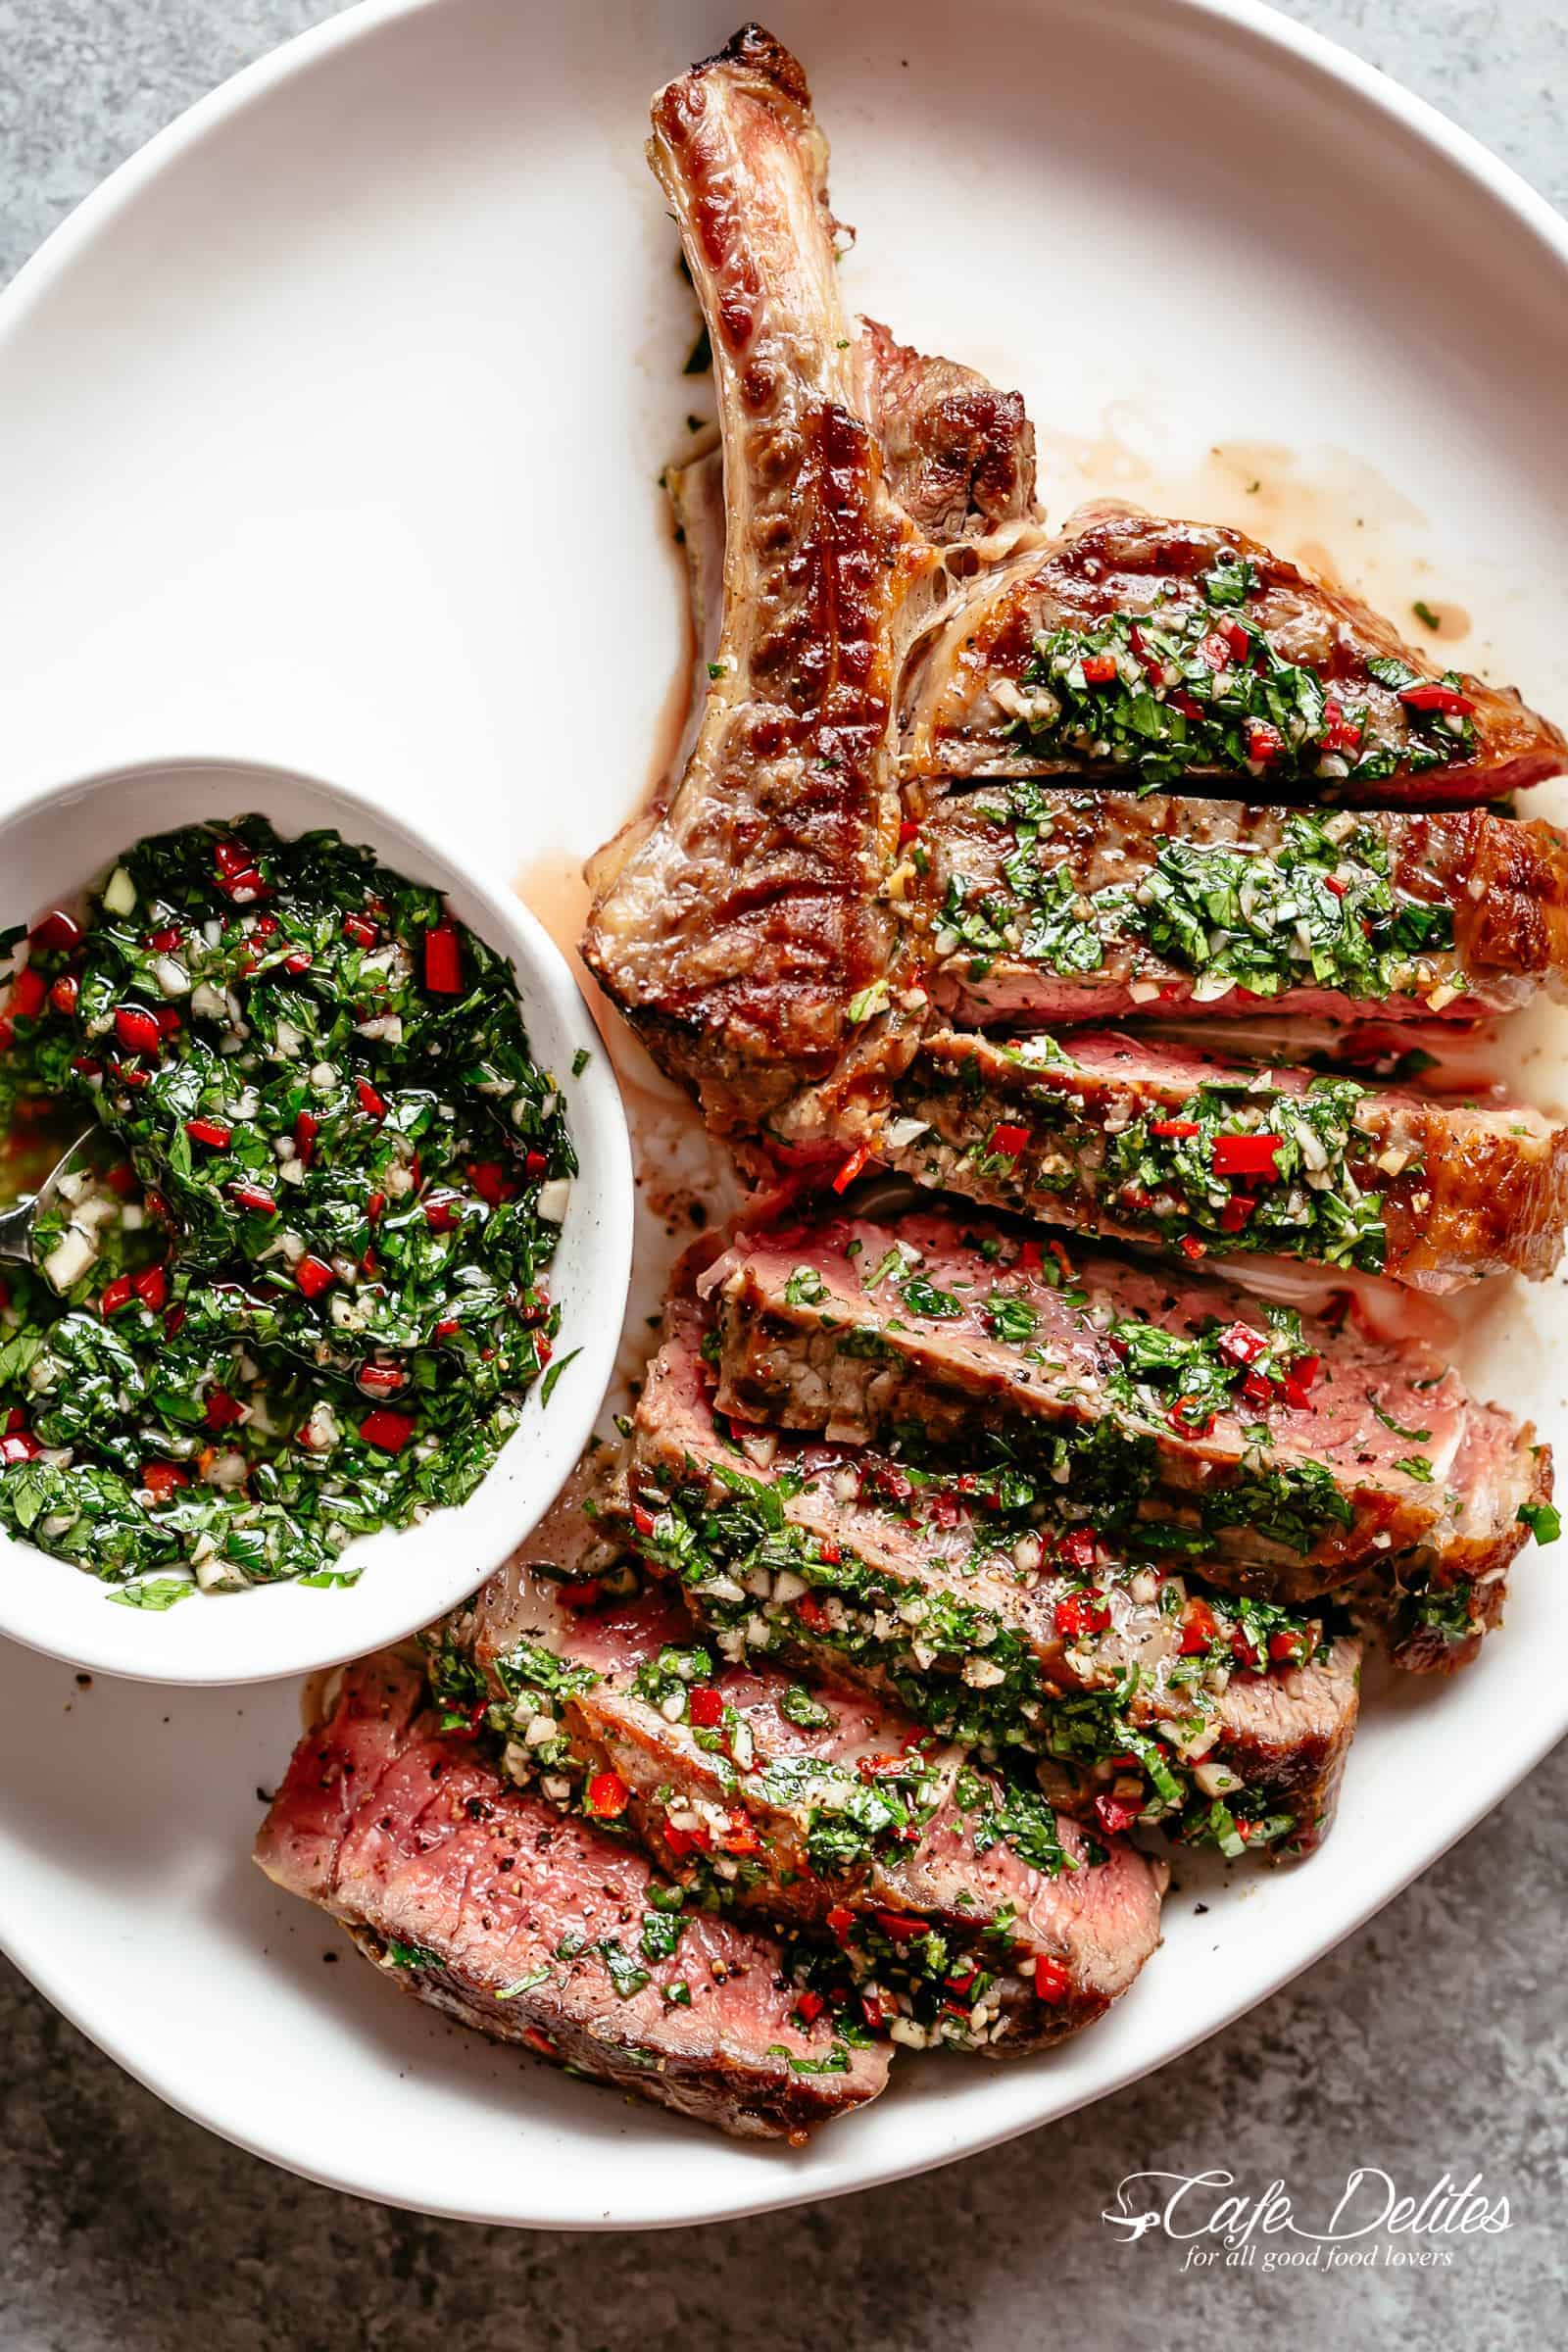 Steaks with Chimichurri! The most delicious silky condiment that drips over your steak | cafedelites.com